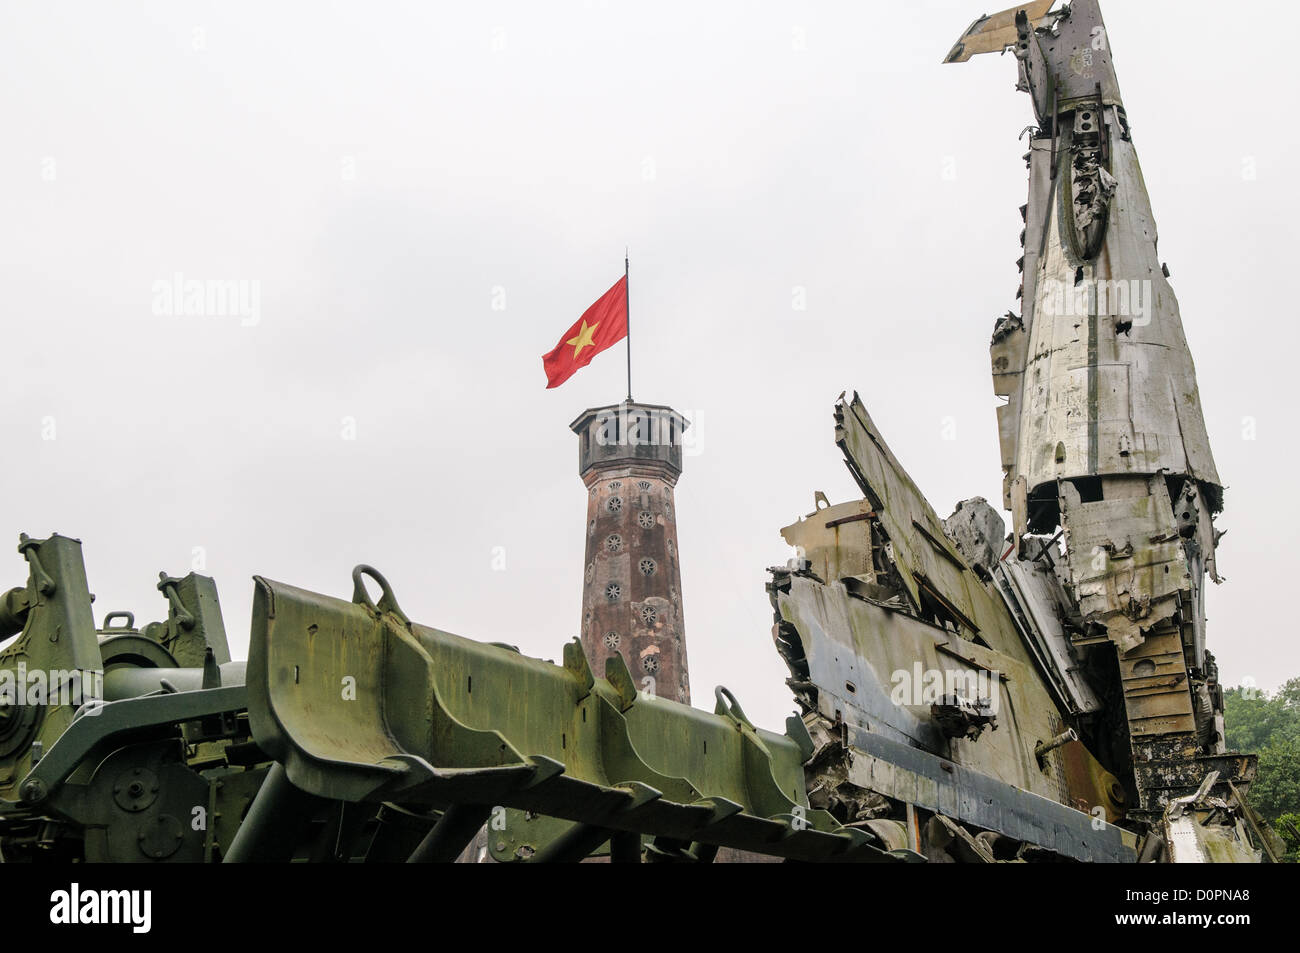 HANOI, Vietnam - Wreckage from the Vietnam War in front of the the Hanoi Flag Tribune at the Vietnam Military History Museum. The tower was built in the early 19th century (1805-1812) and stands 33.5 meters tall. A 54-step spiral staircase leads to the top, where there is a small viewing room. A national flag has flown atop the tower night and day since October 10, 1954, after the defeat of the French at Dien Bien Phu. The monument has been designated by the Ministry of Culture and Information as a National Cultural and Historic Relic. The museum was opened on July 17, 1956, two years after th Stock Photo